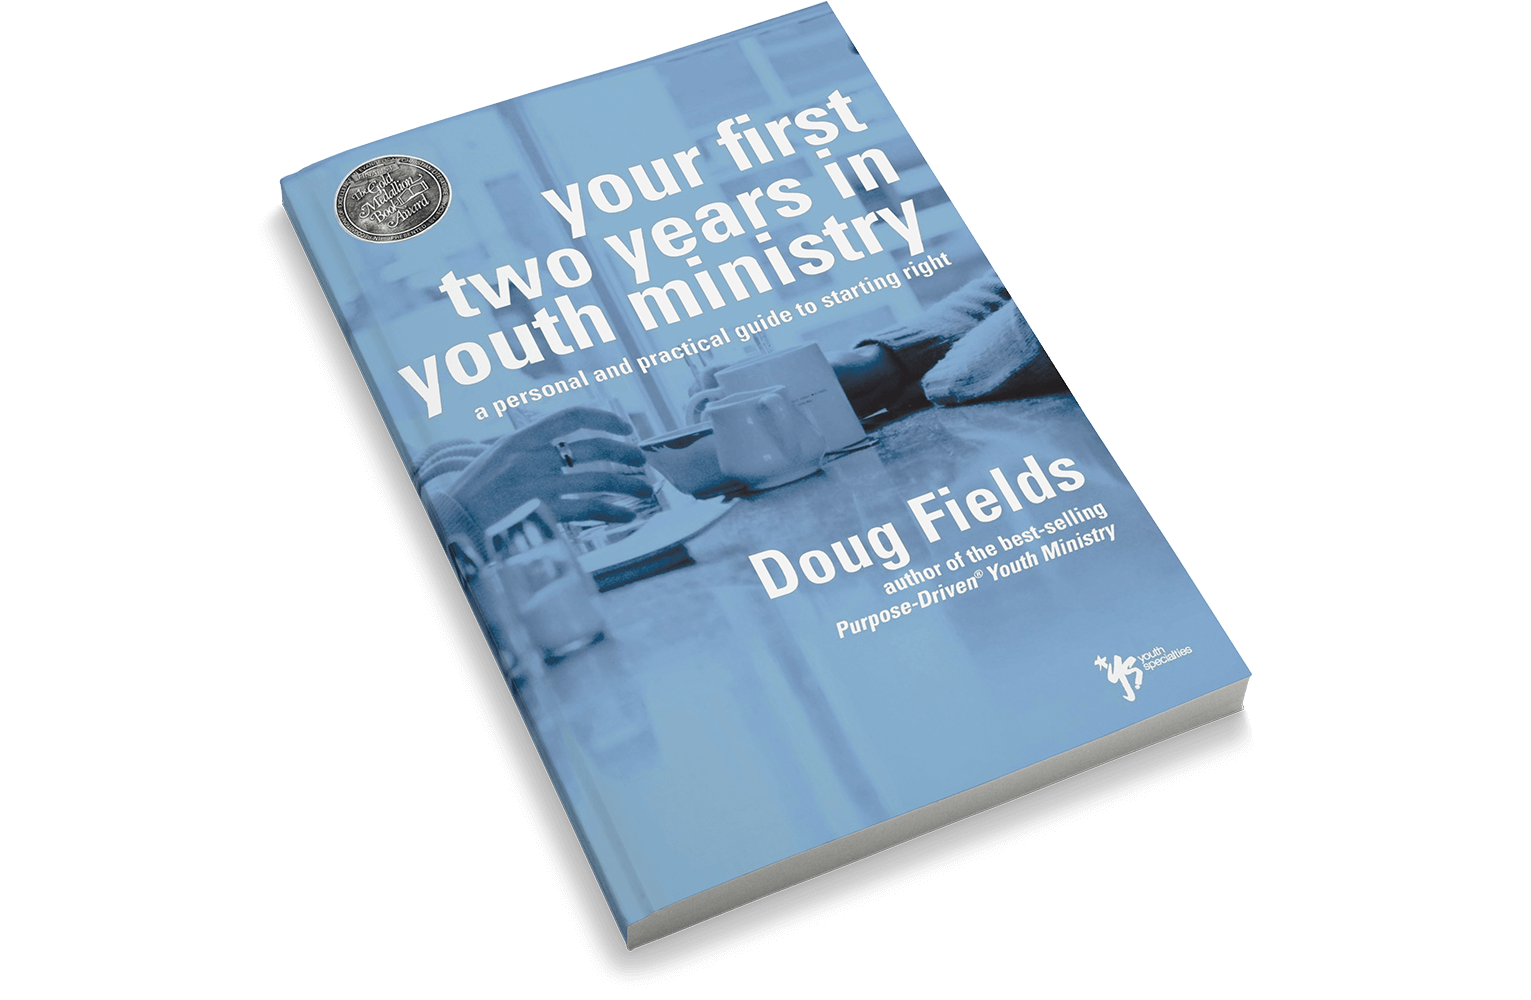 Your First Two Years In Youth Ministry